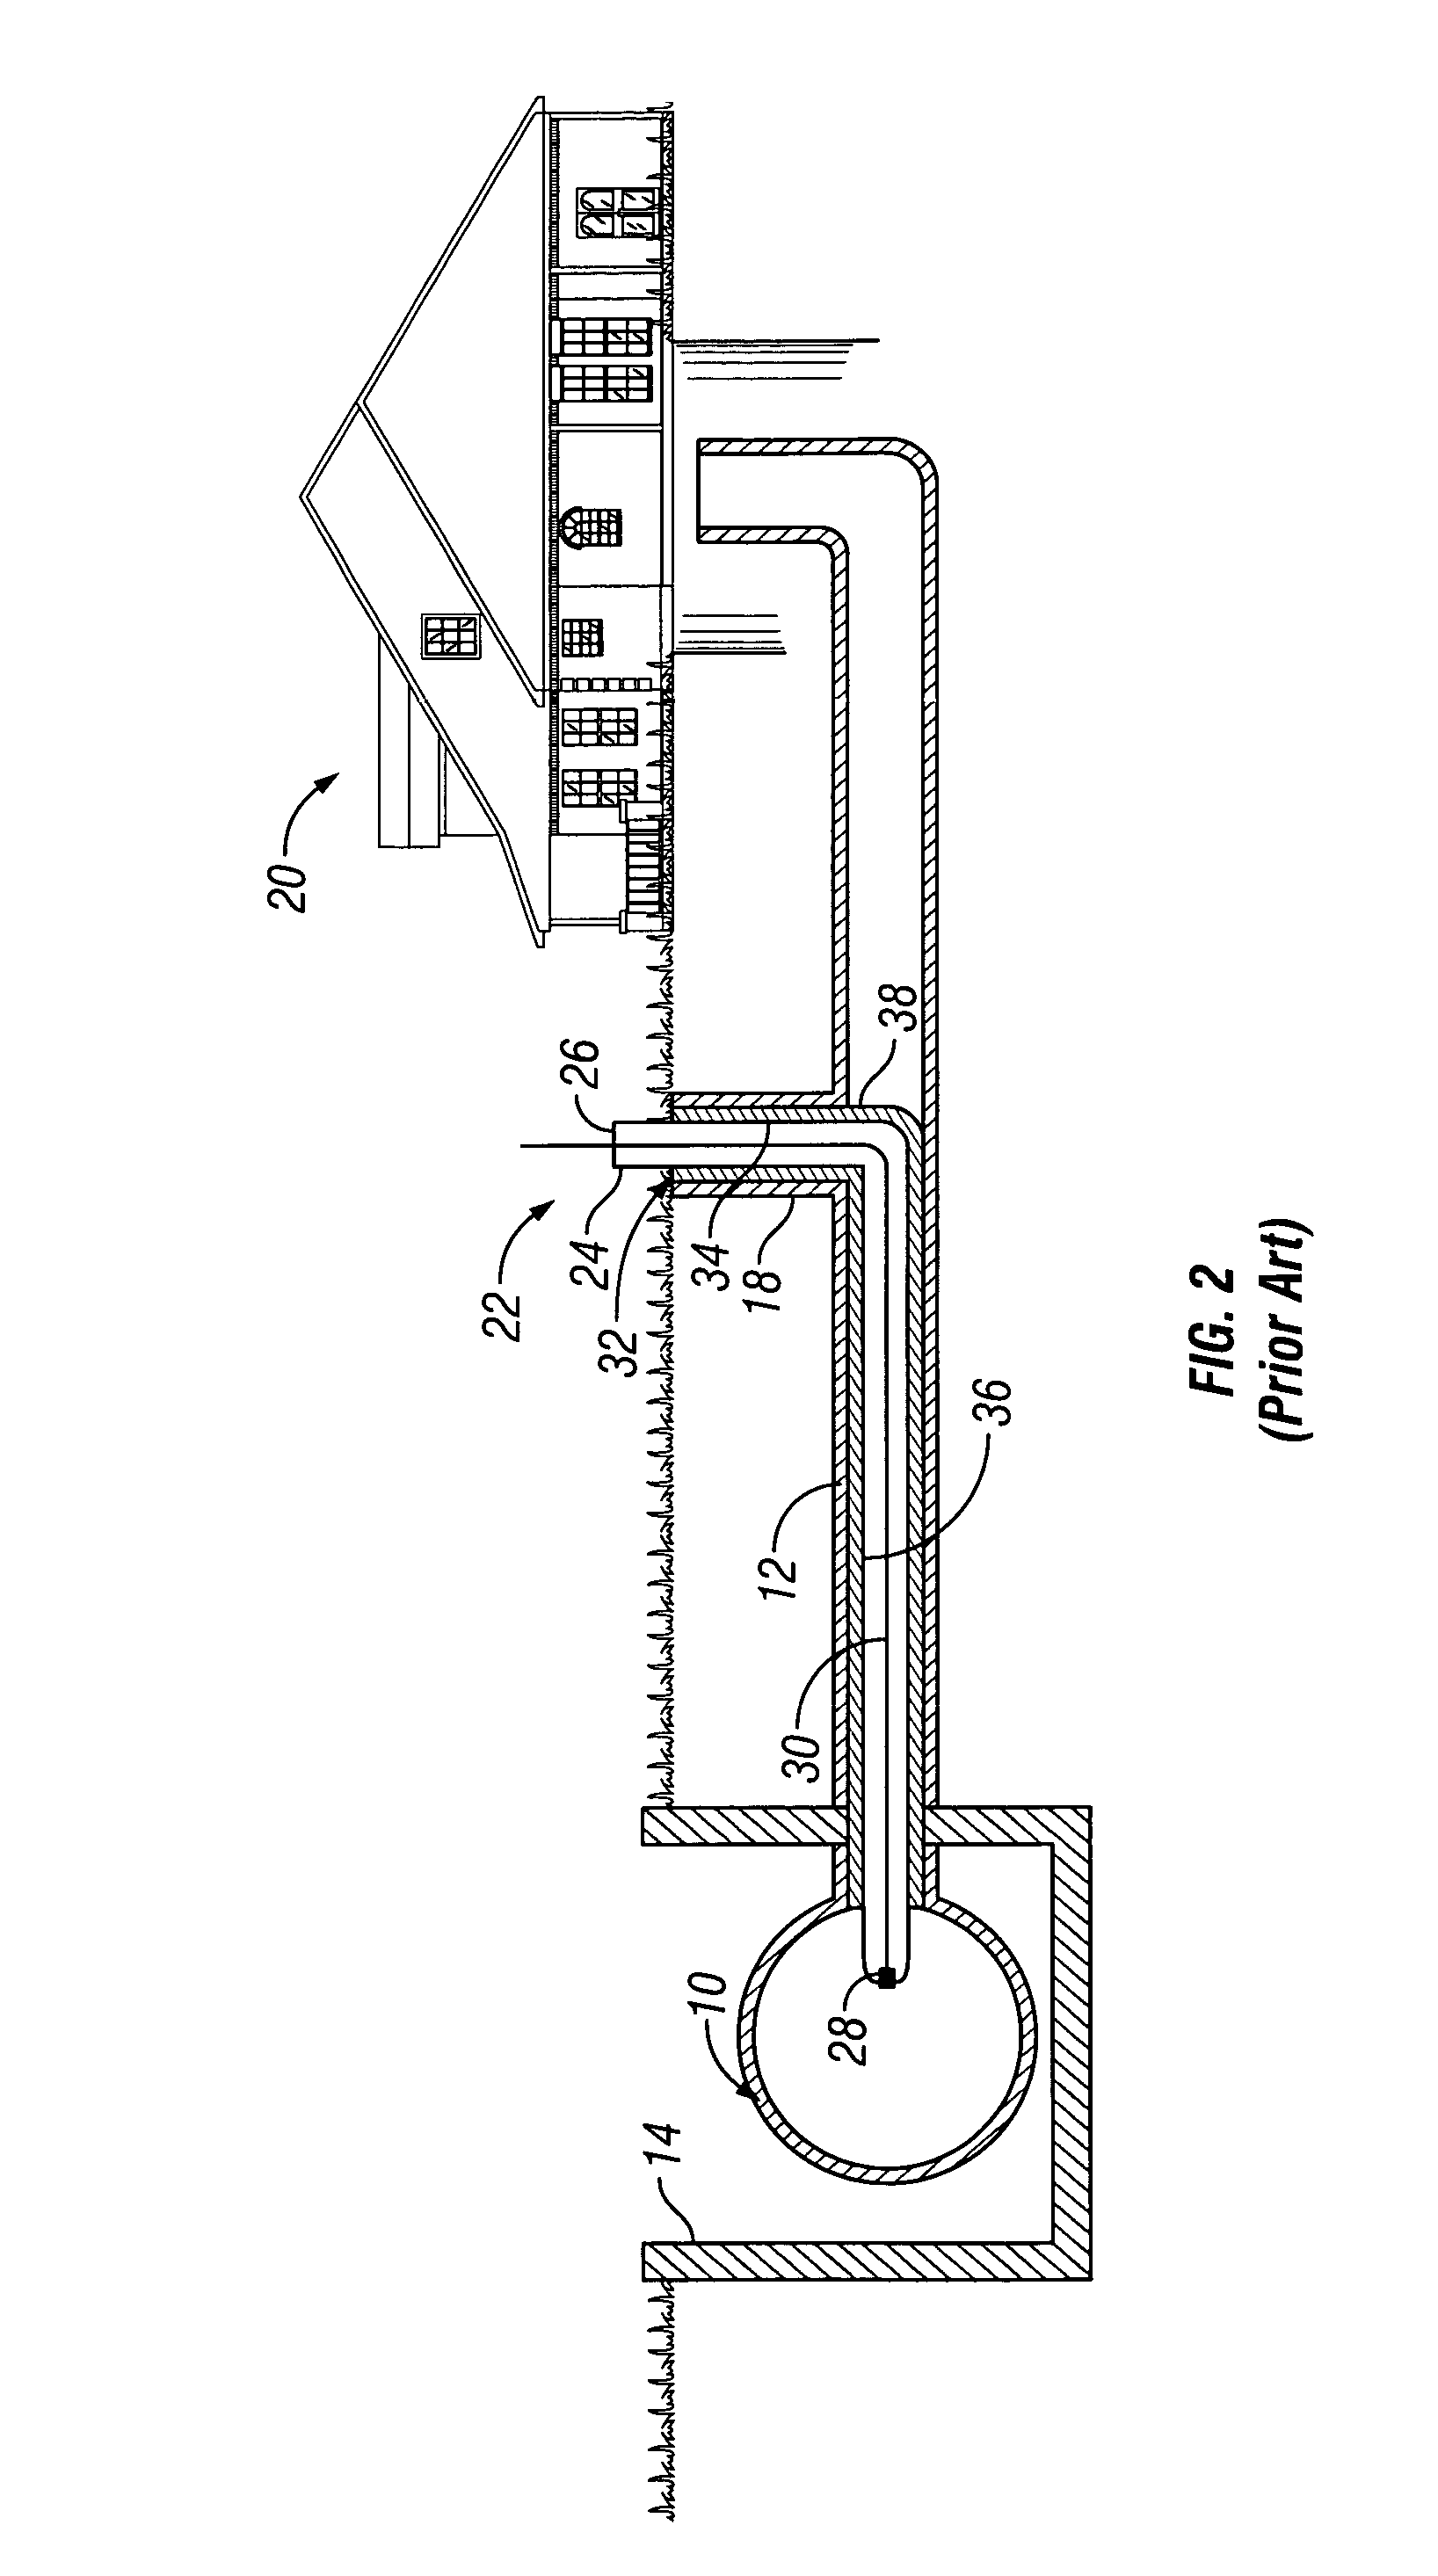 Method of locating liner within sewer pipe